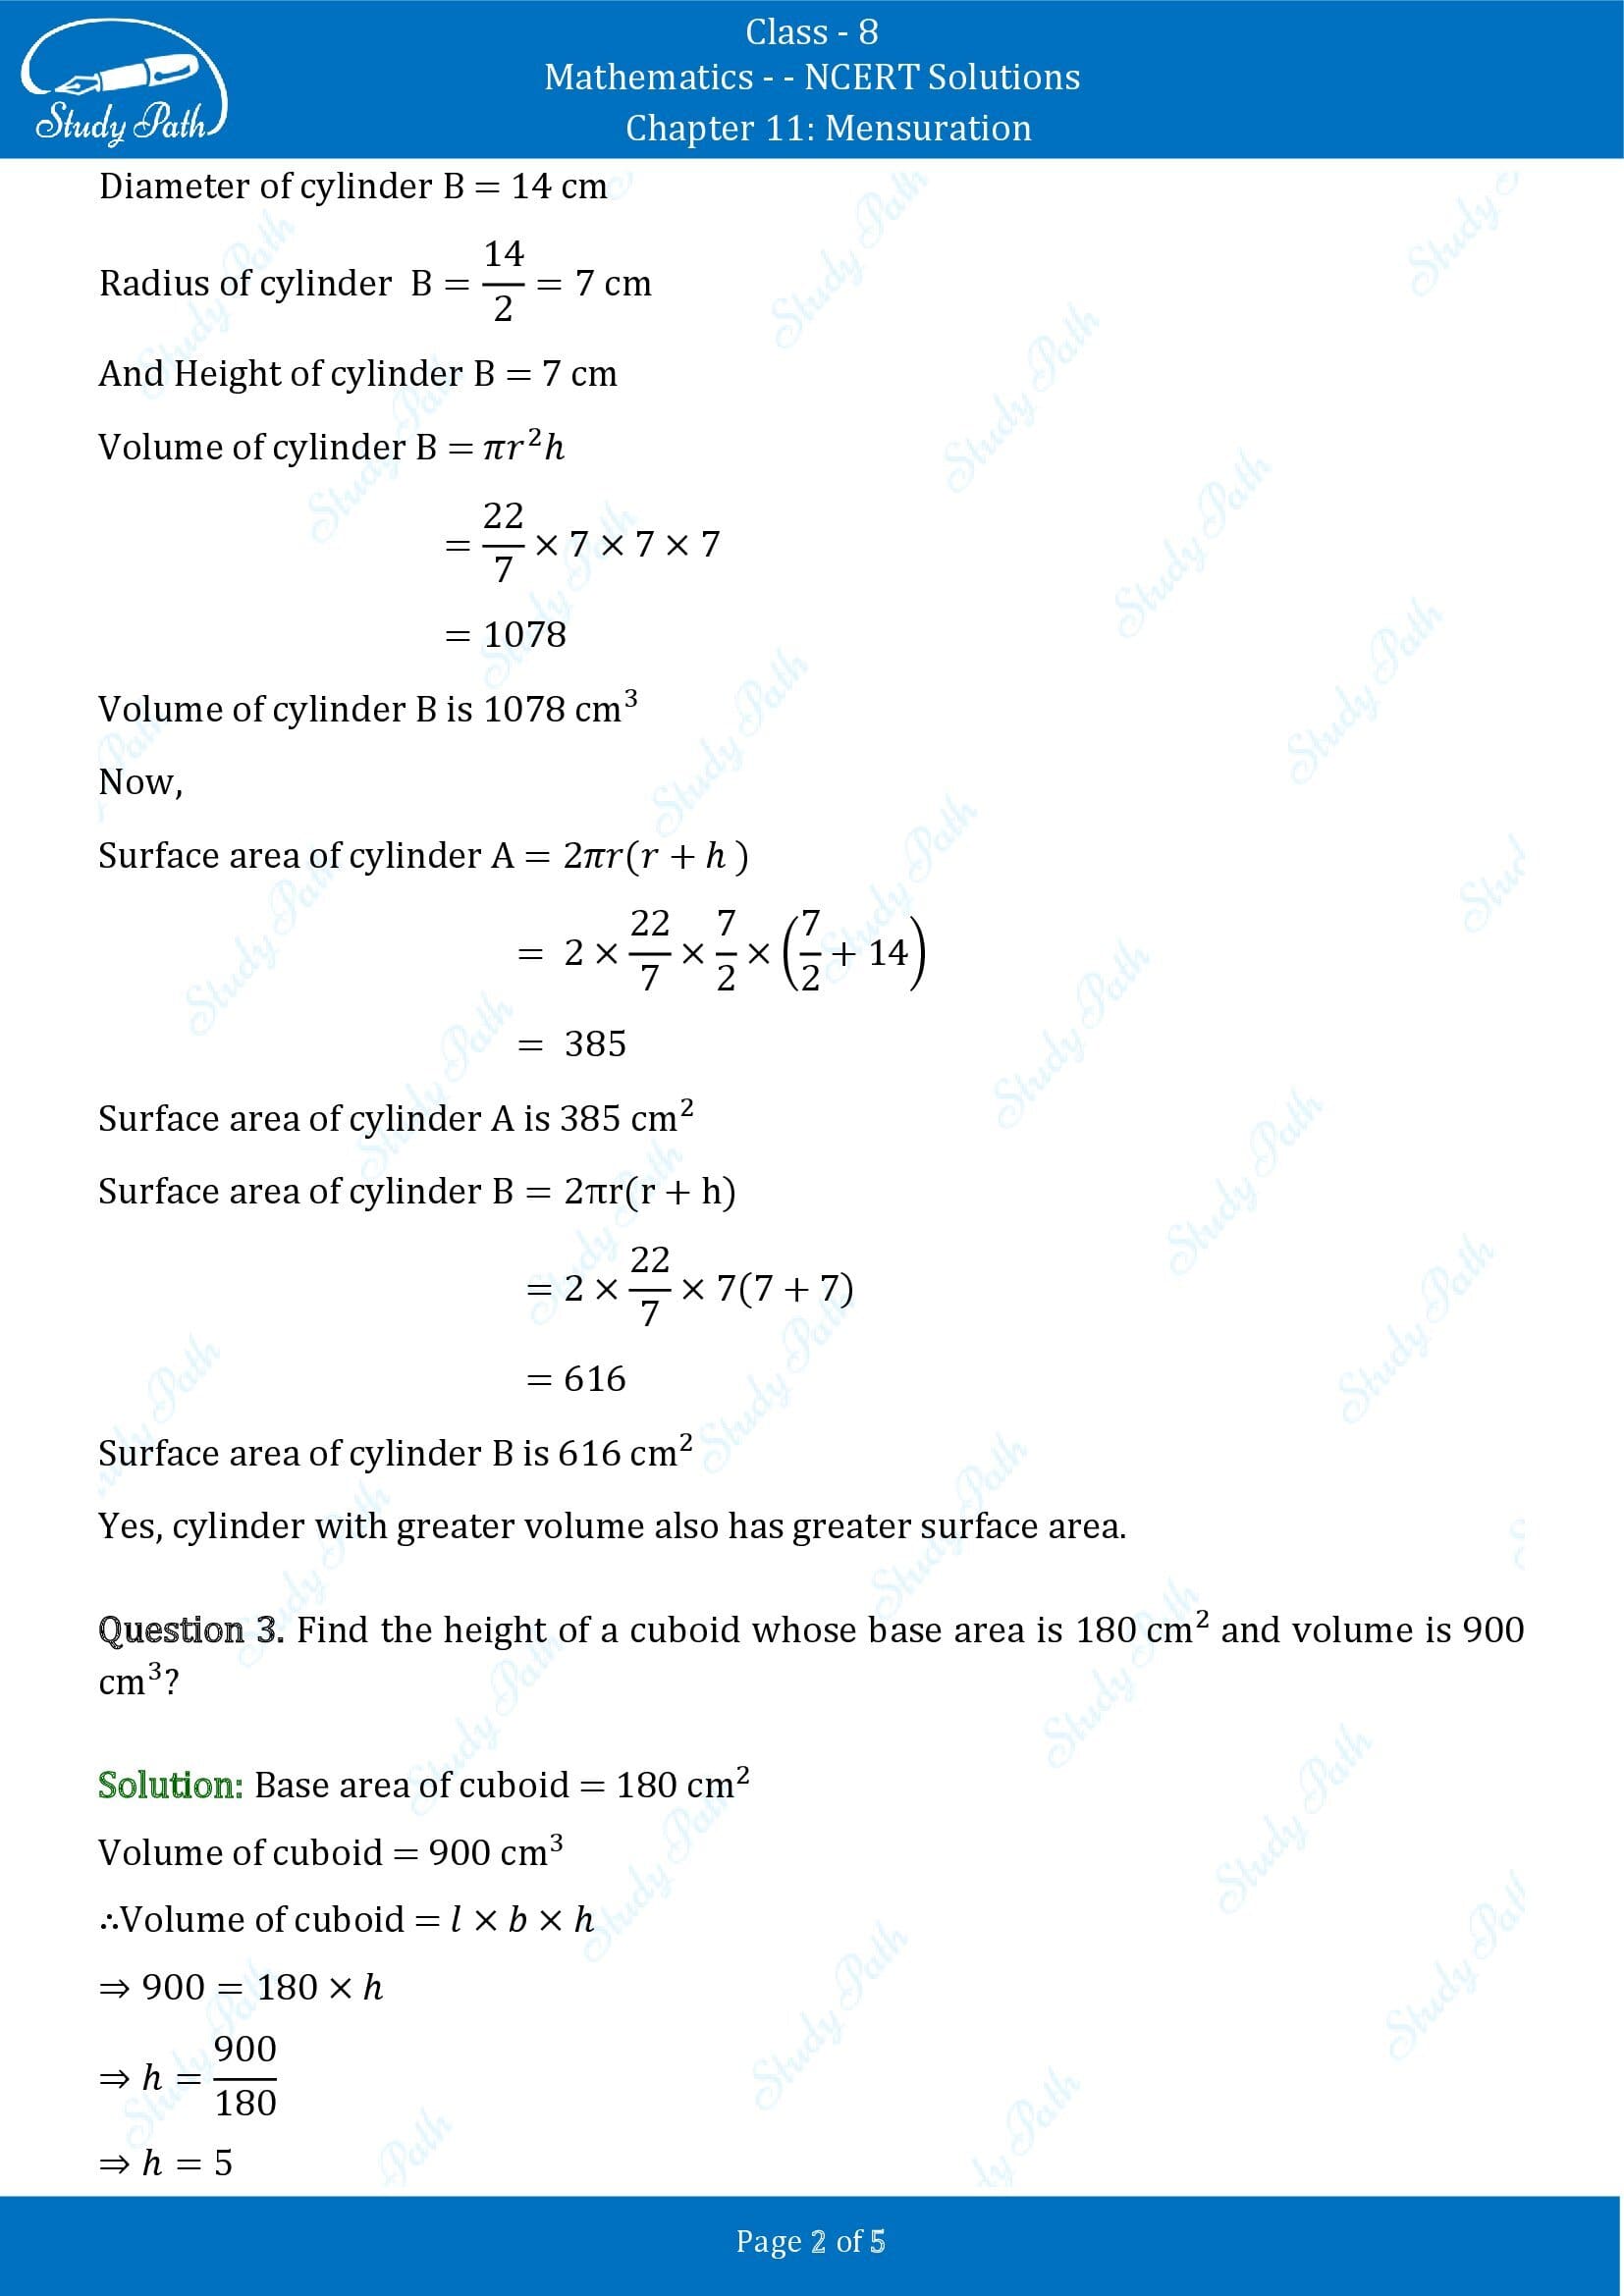 NCERT Solutions for Class 8 Maths Chapter 11 Mensuration Exercise 11.4 00002